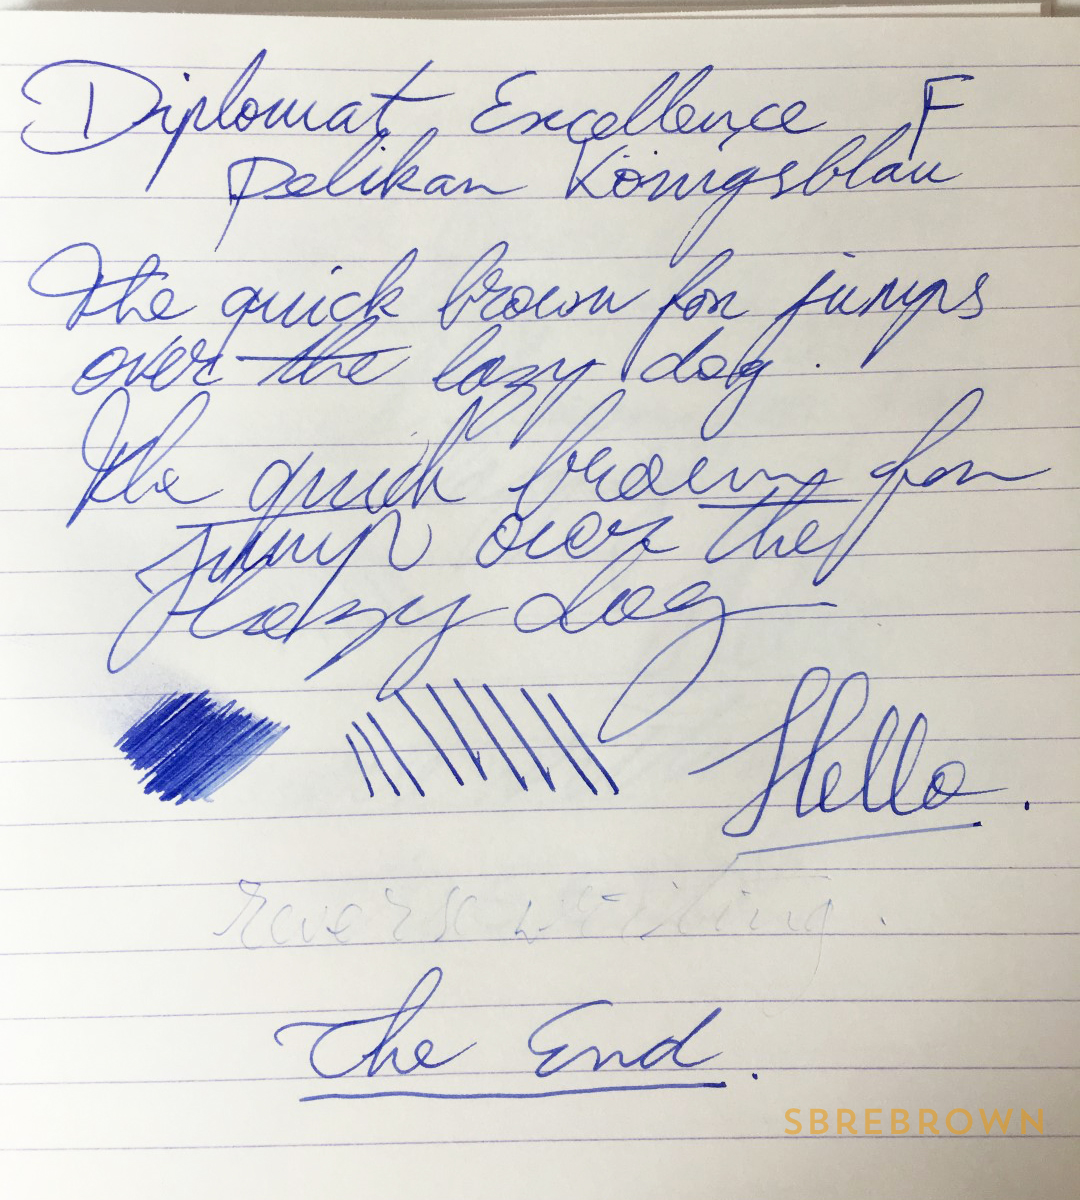 Diplomat Excellence A Evergreen Fountain Pen Review & Giveaway (6)